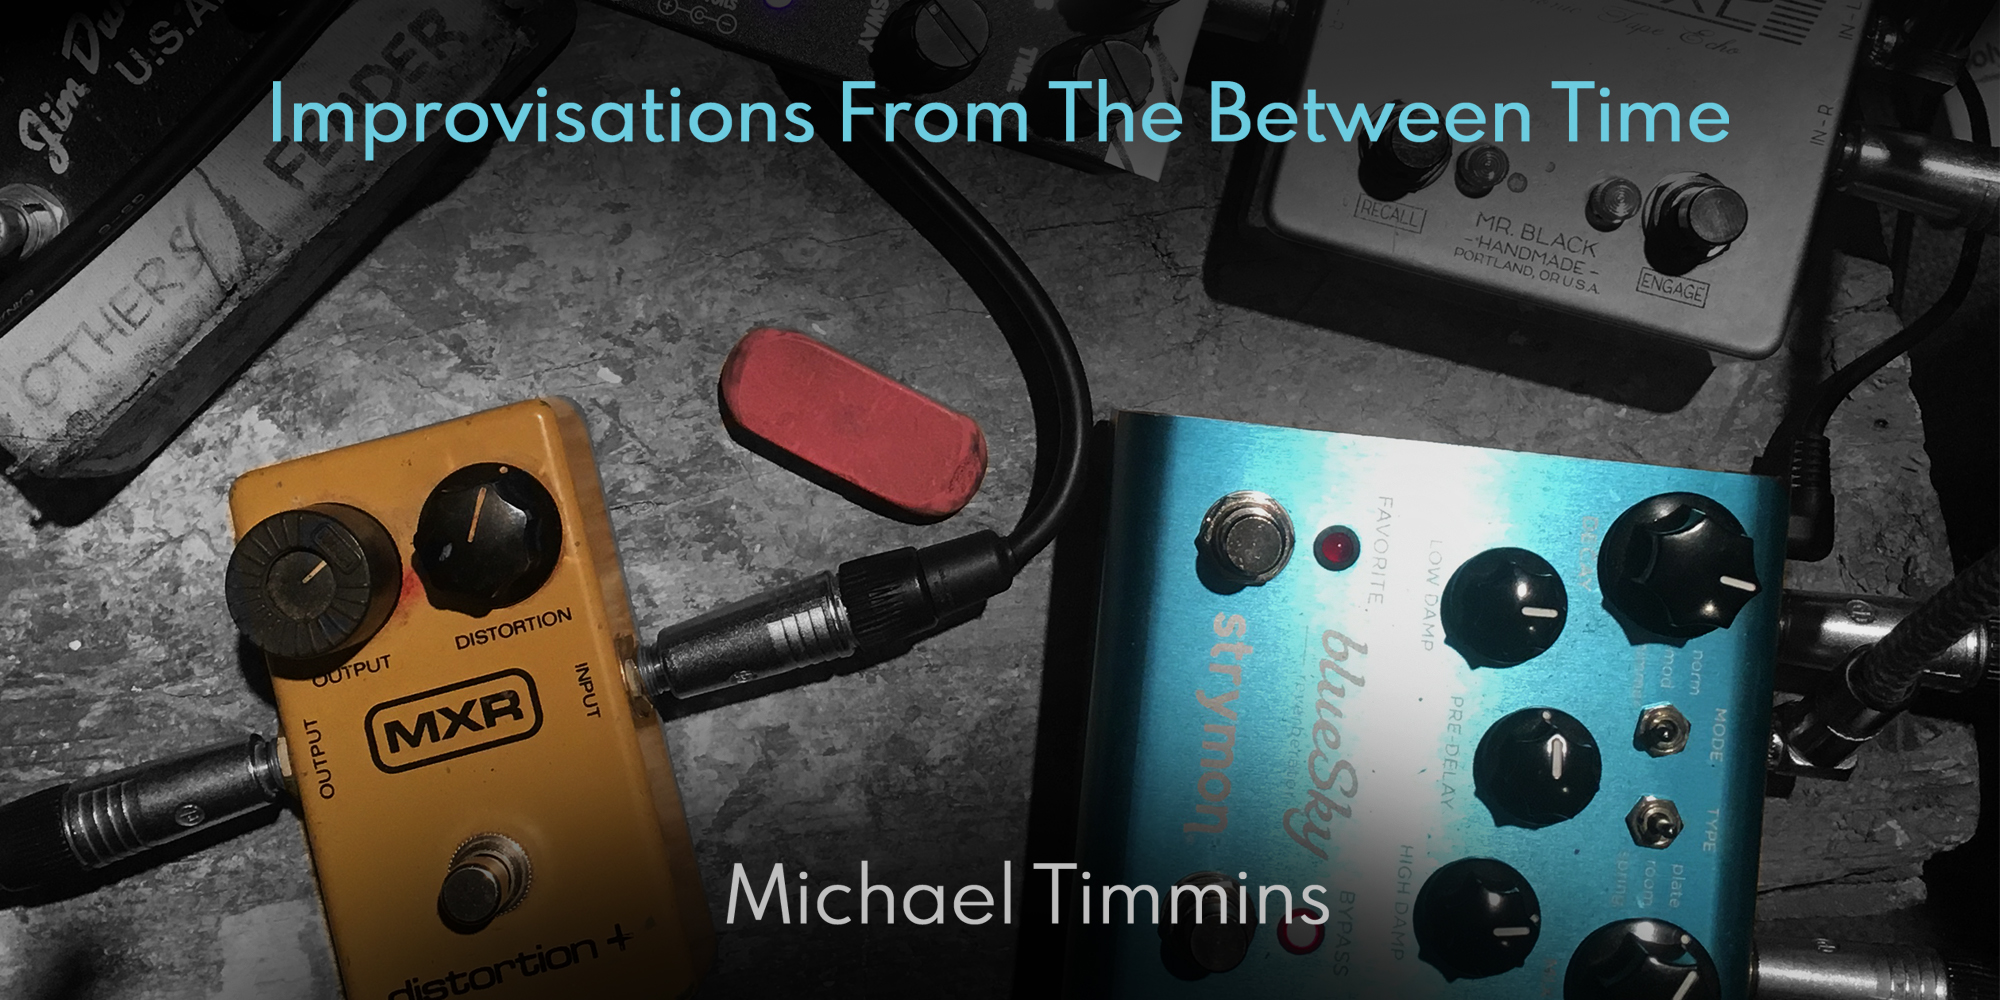 Improvisations From the Between Time